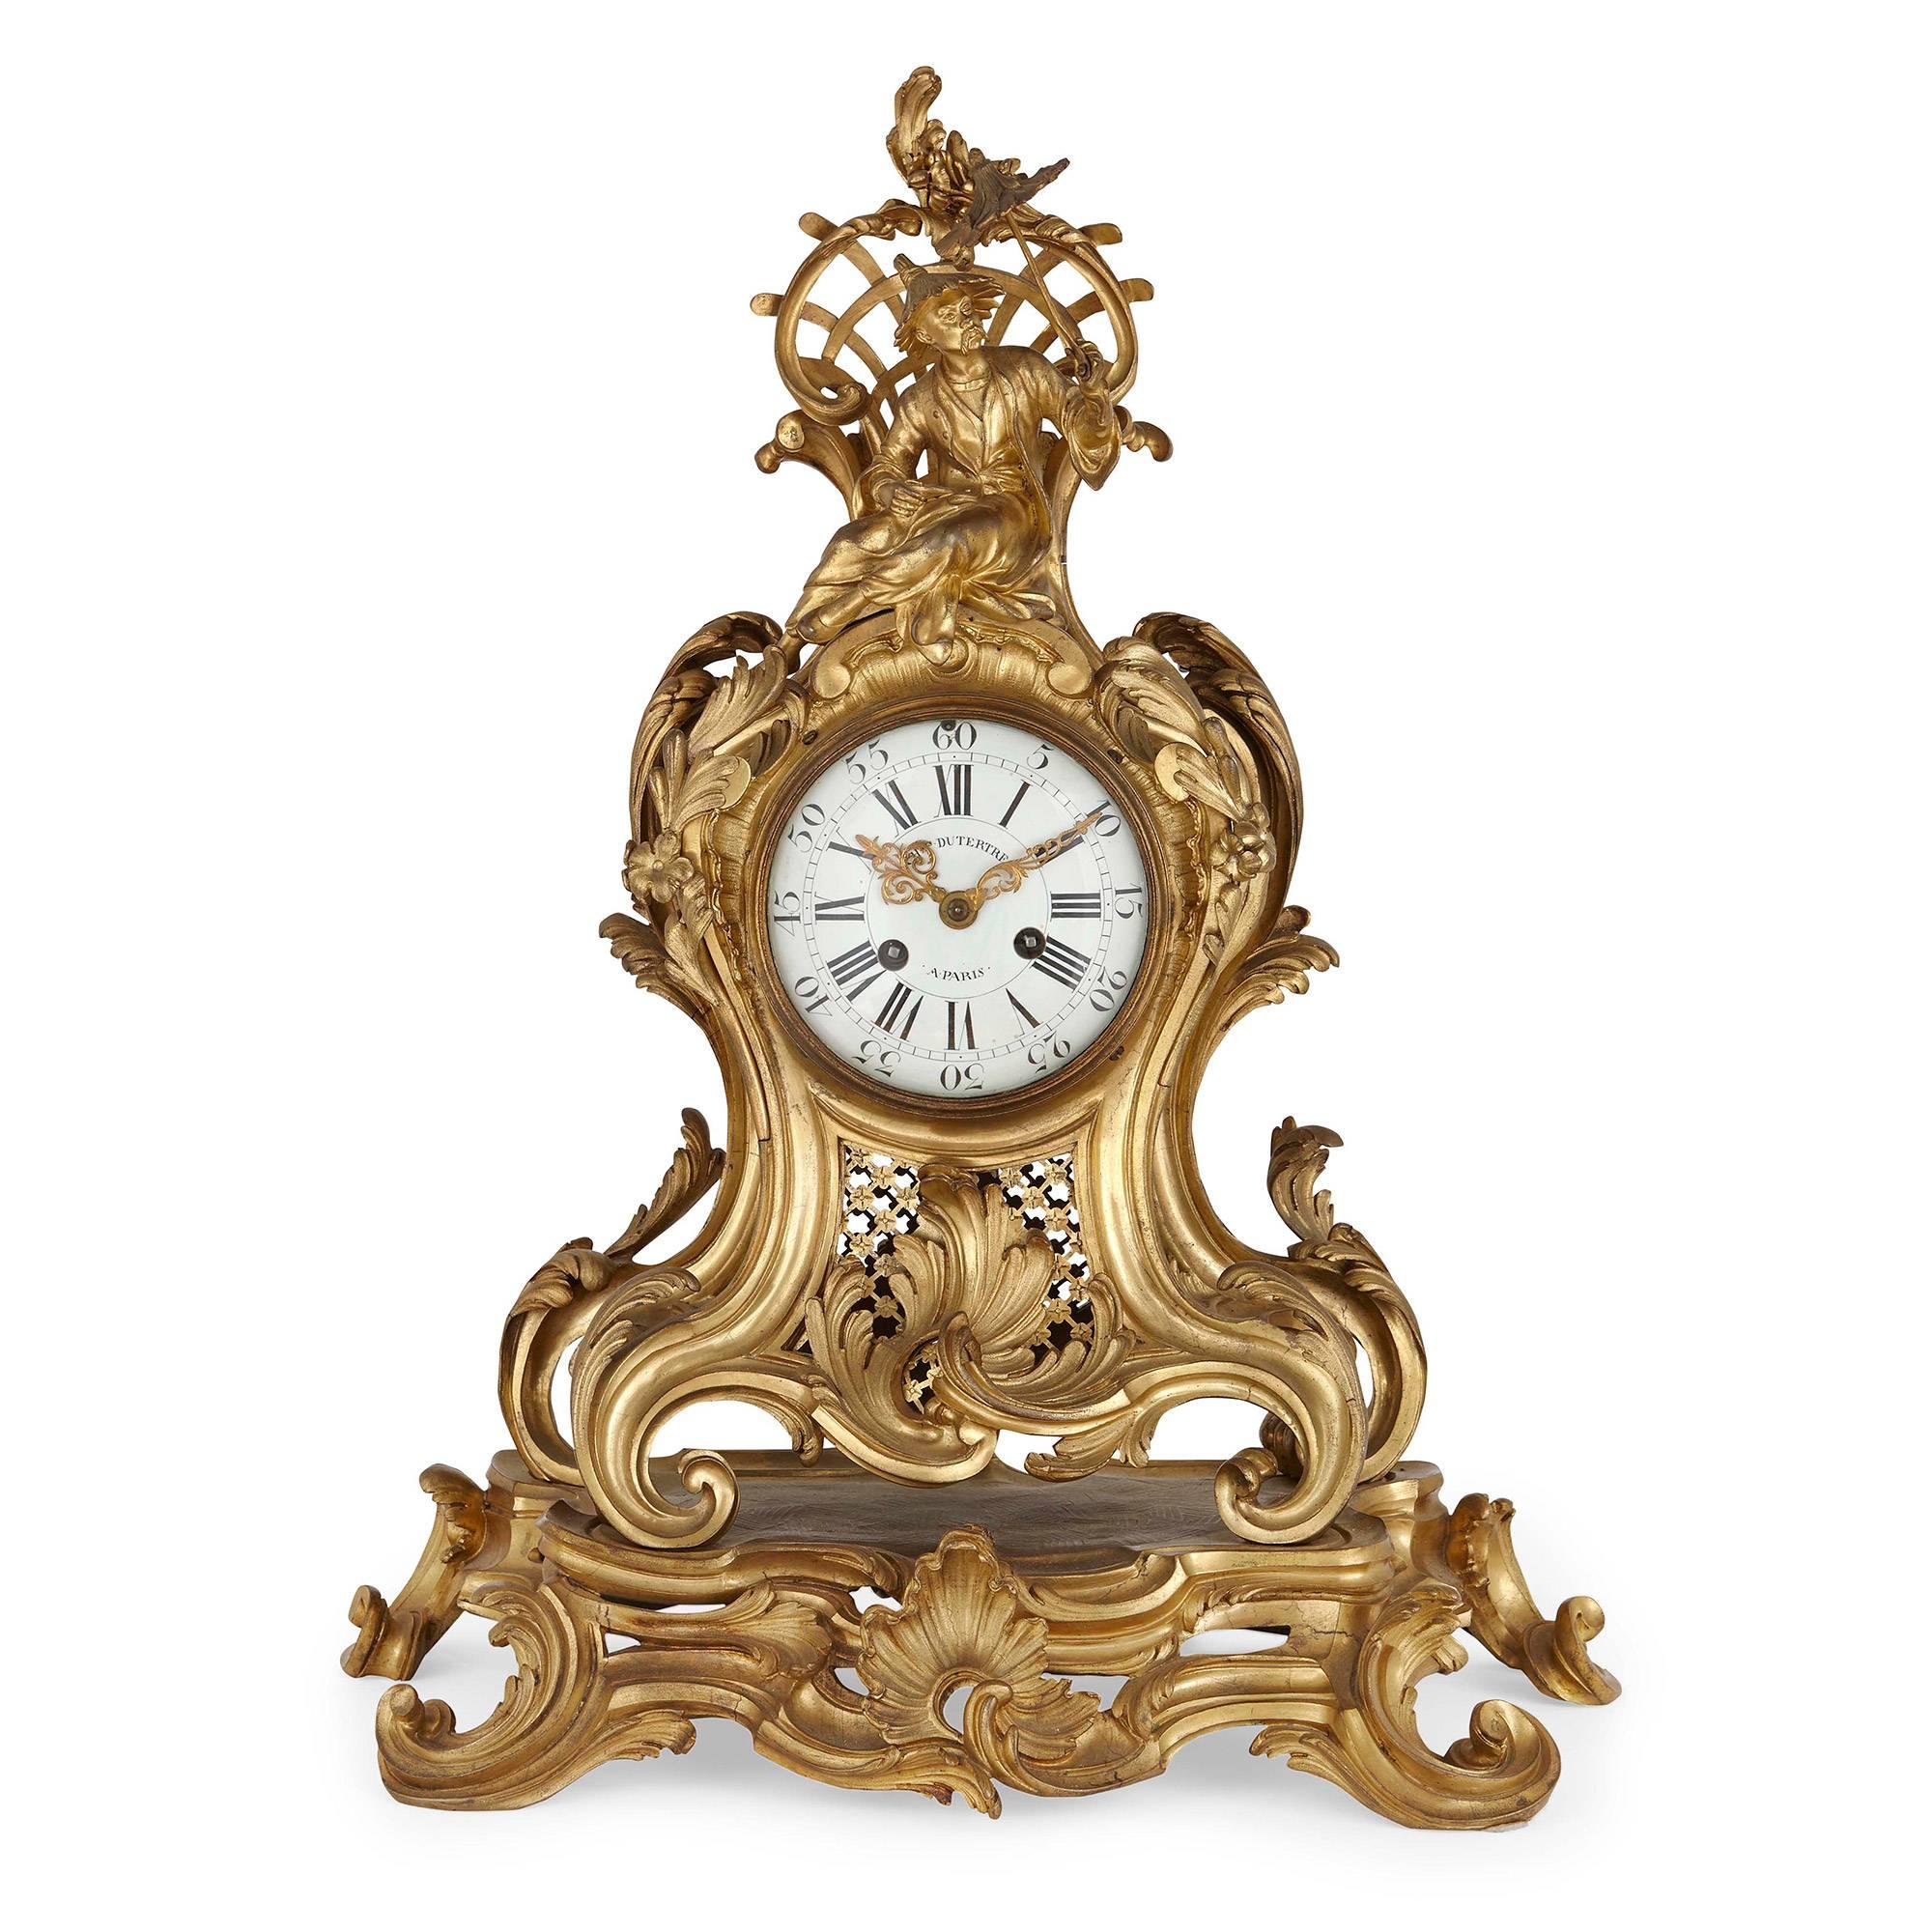 The case of this Louis XV period mantel clock is attributed to Jean Joseph de Saint-Germain (Paris, 1719-1791). Decorated with a scrolled leaf motif throughout, the fine case is surmounted by an Asian figure in costume, holding a parasol and sitting